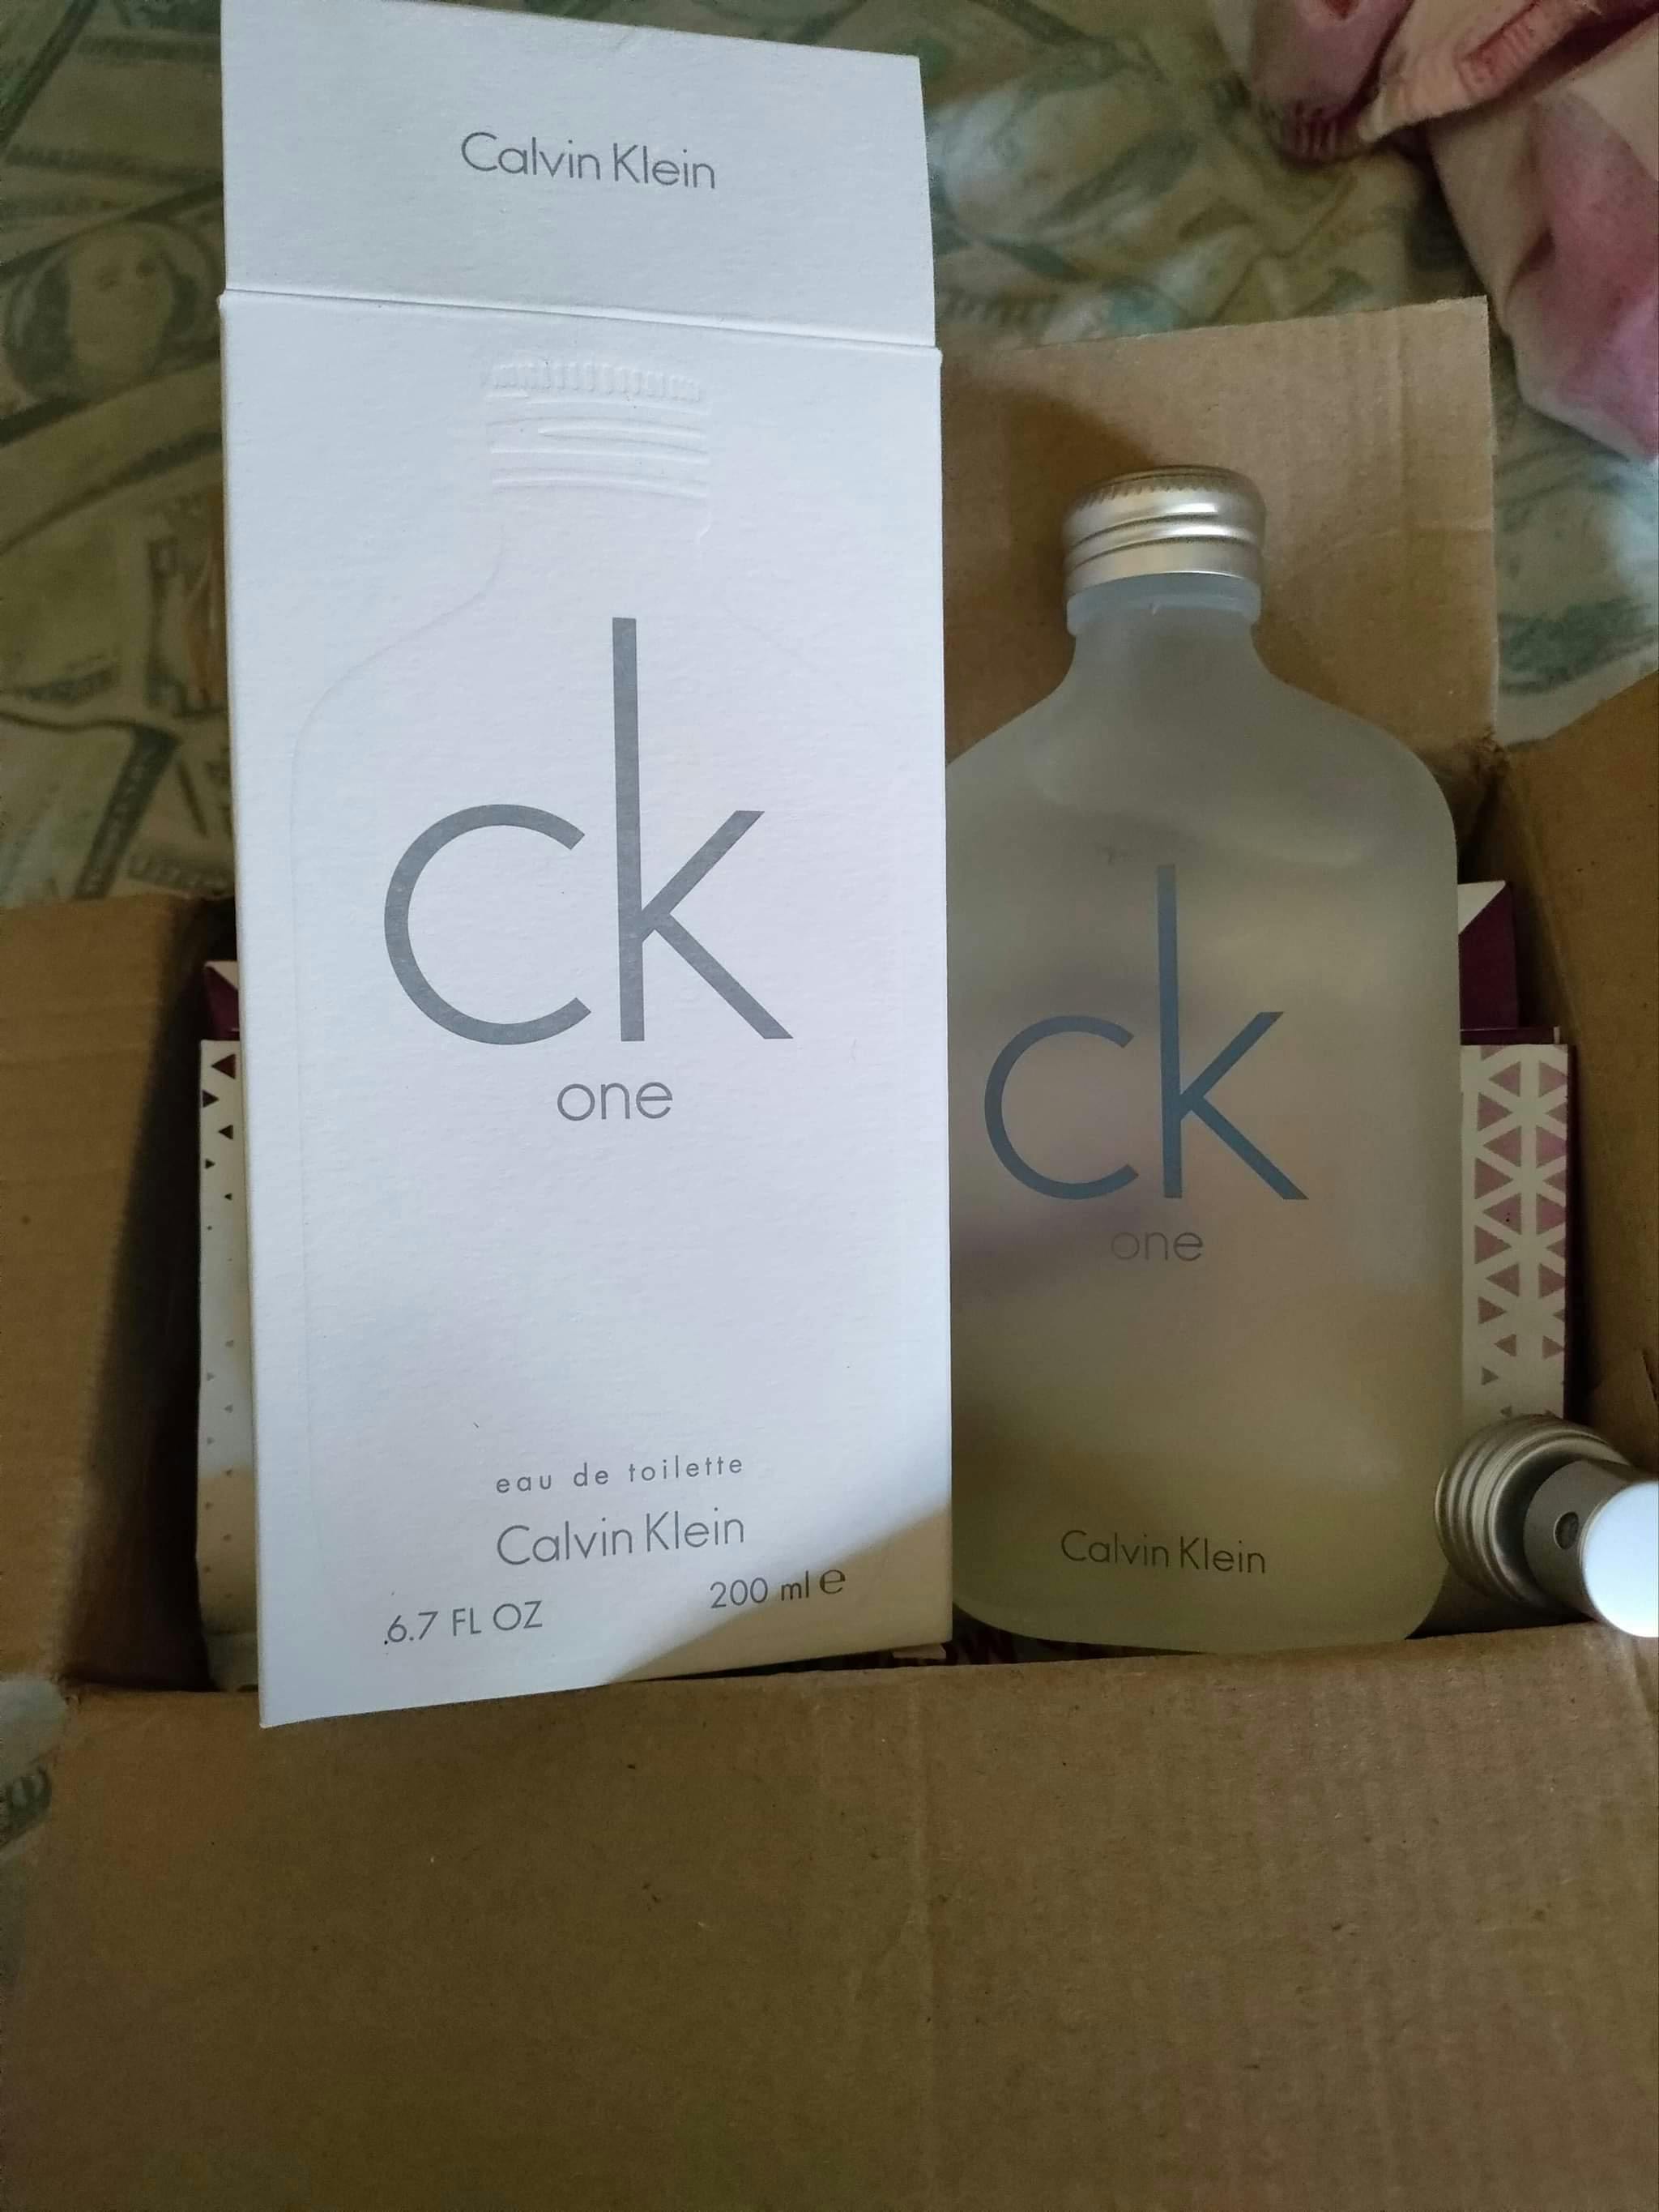 Calvin Klein CK One 200ml | Branded and Authentic Perfumes for Men and Women